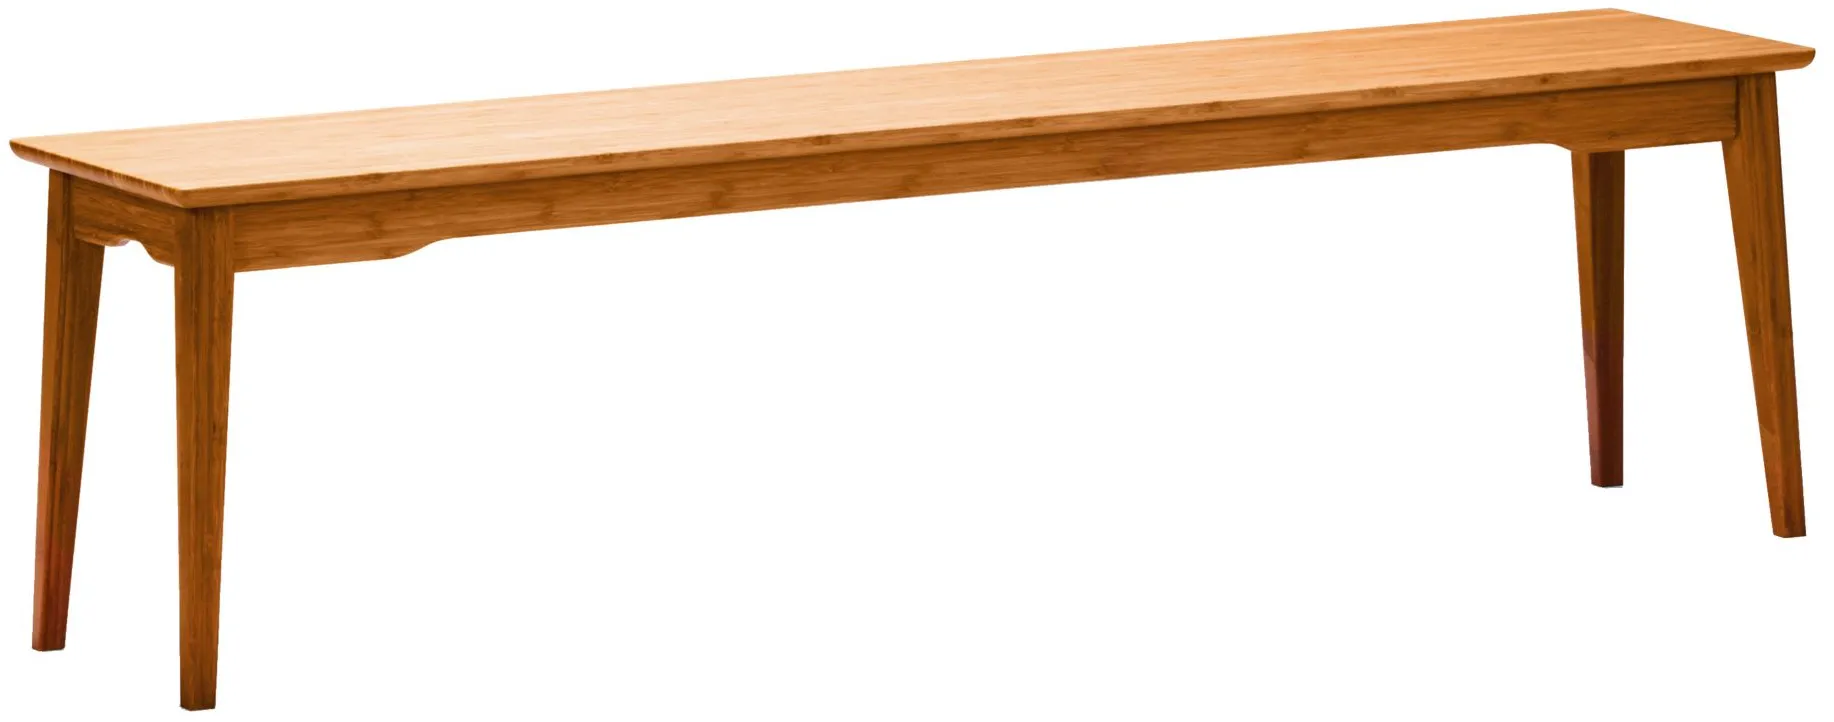 Currant Long Dining Bench in Caramelized by Greenington